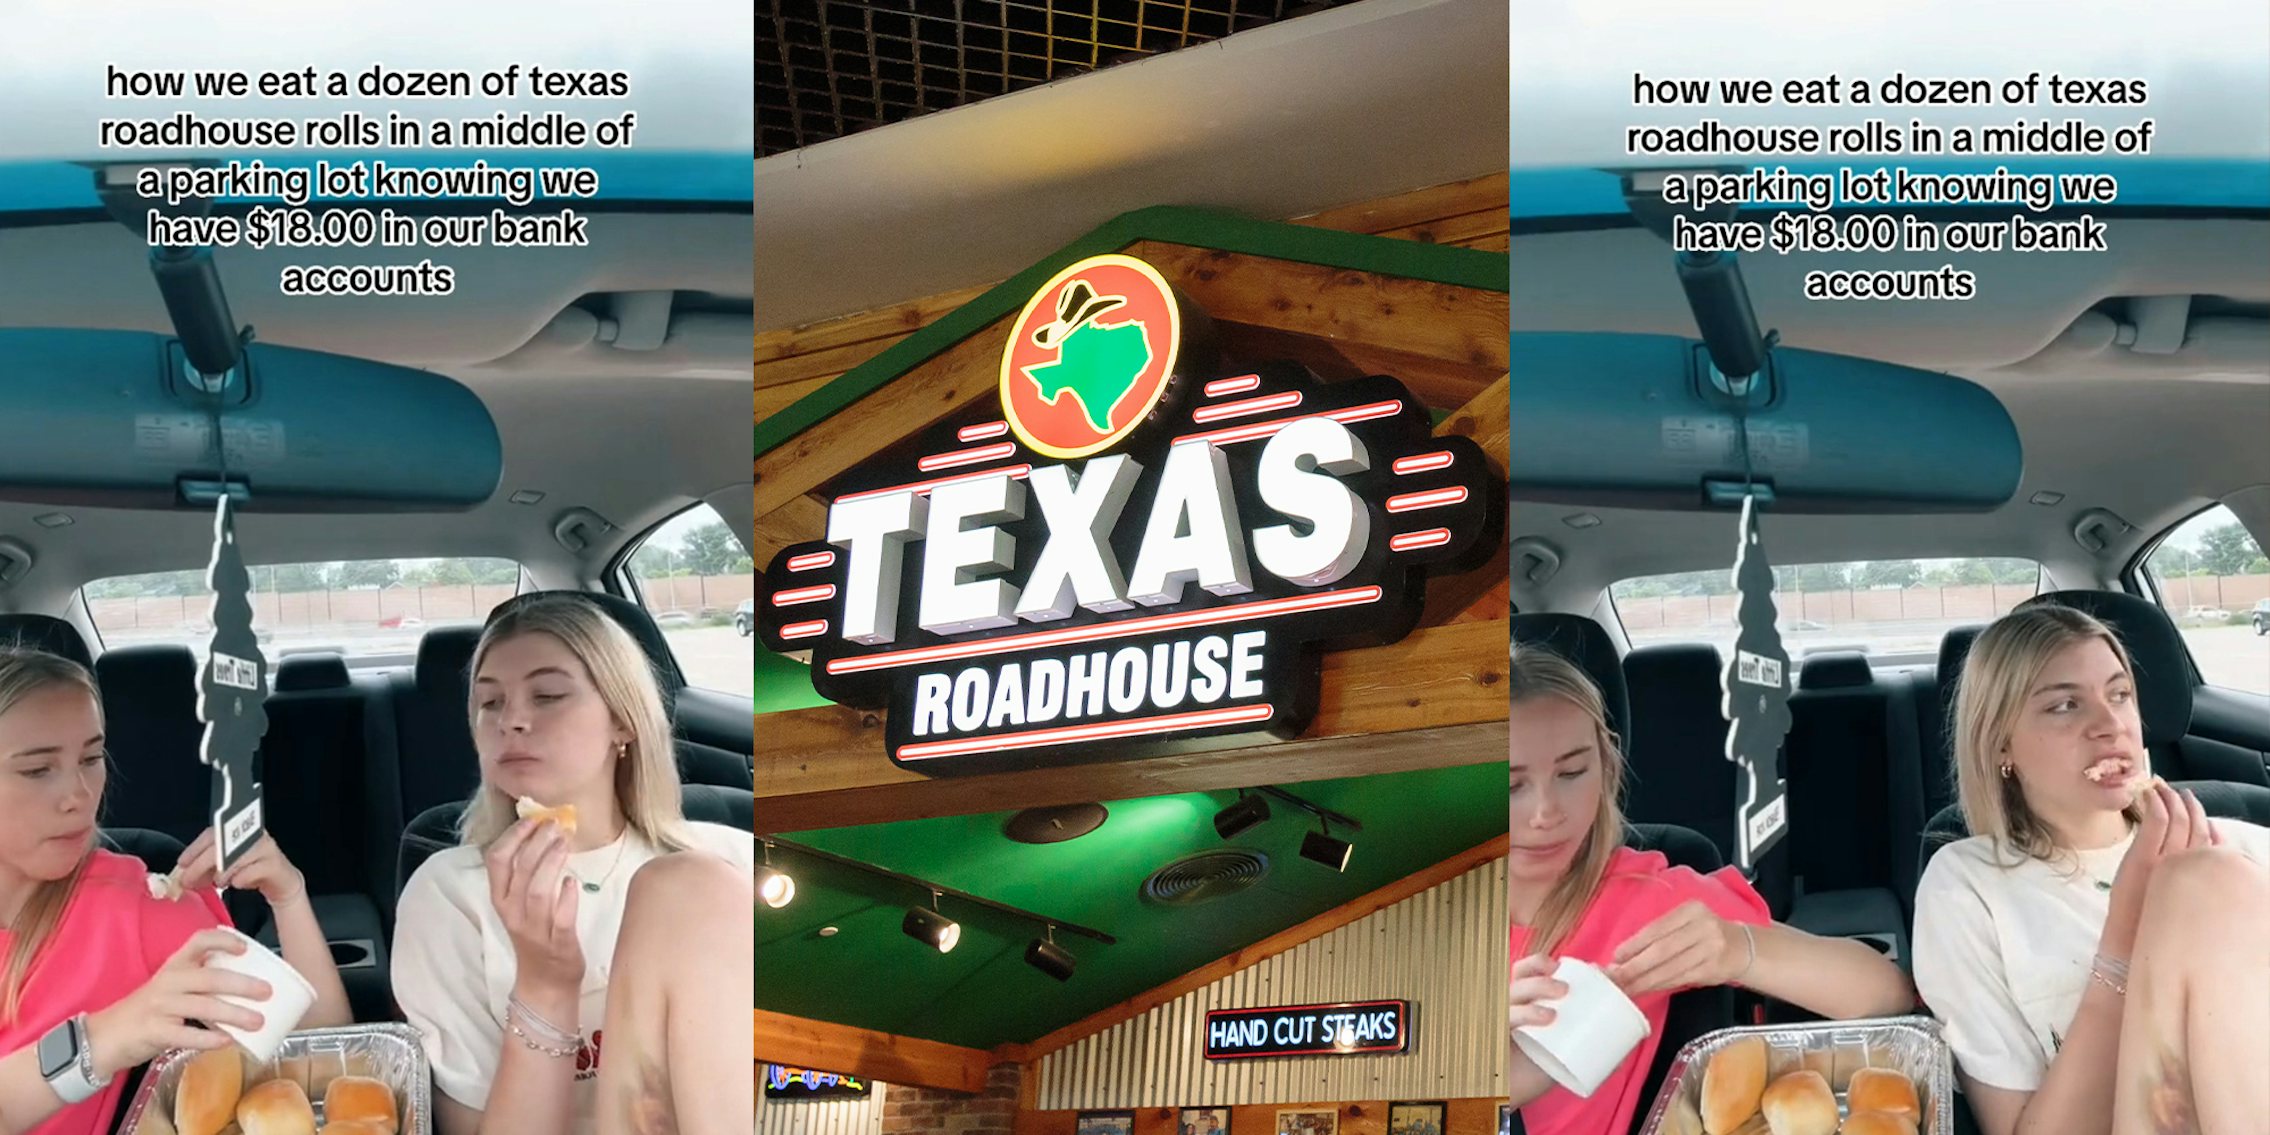 Texas Roadhouse customers with '$18 in their bank account' share a dozen rolls in parking lot.